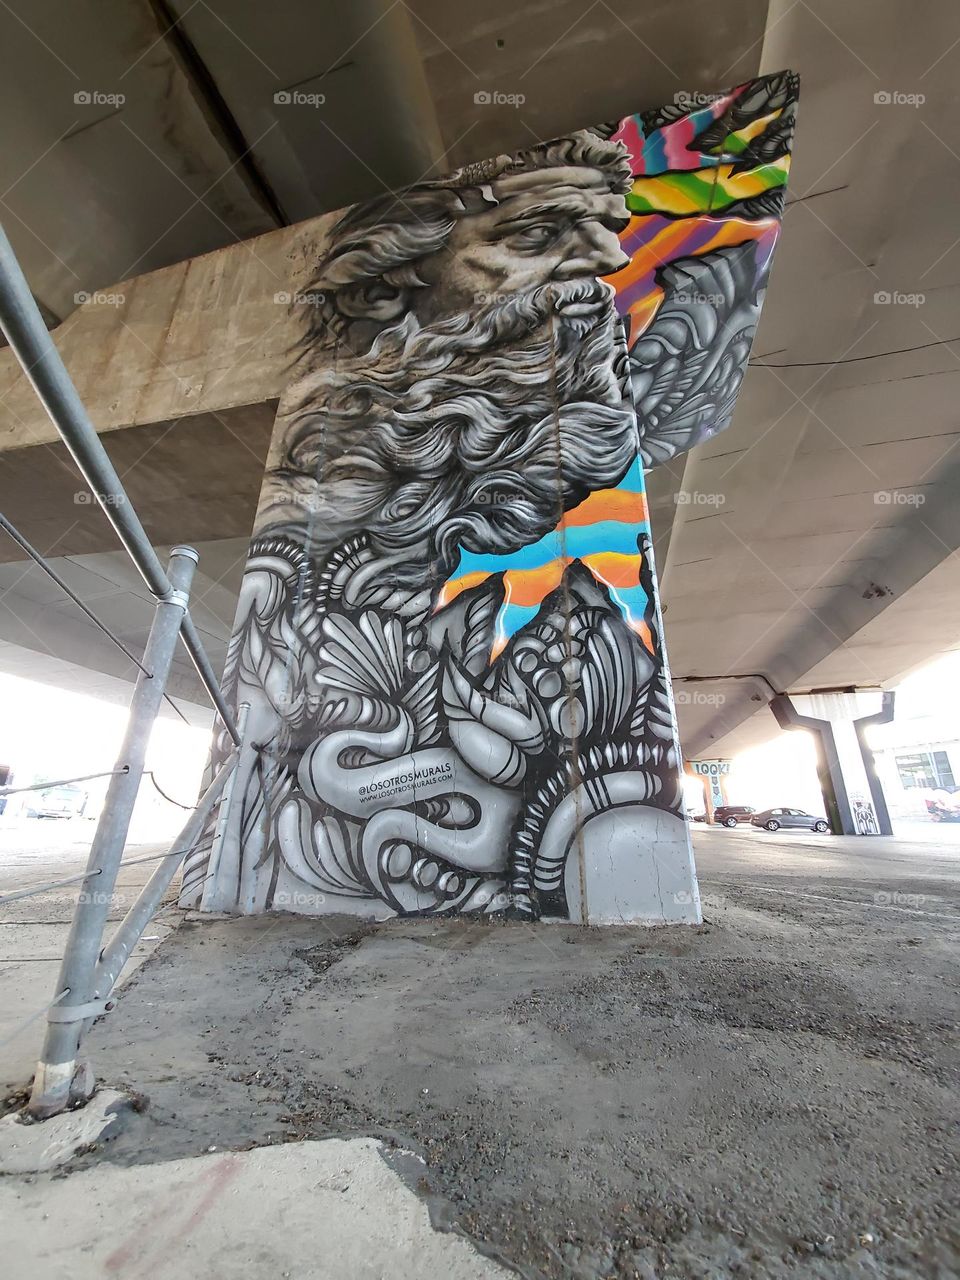 Visual street art on cement Highway pillar under highway in a parking lot. Appears to be Zeus.